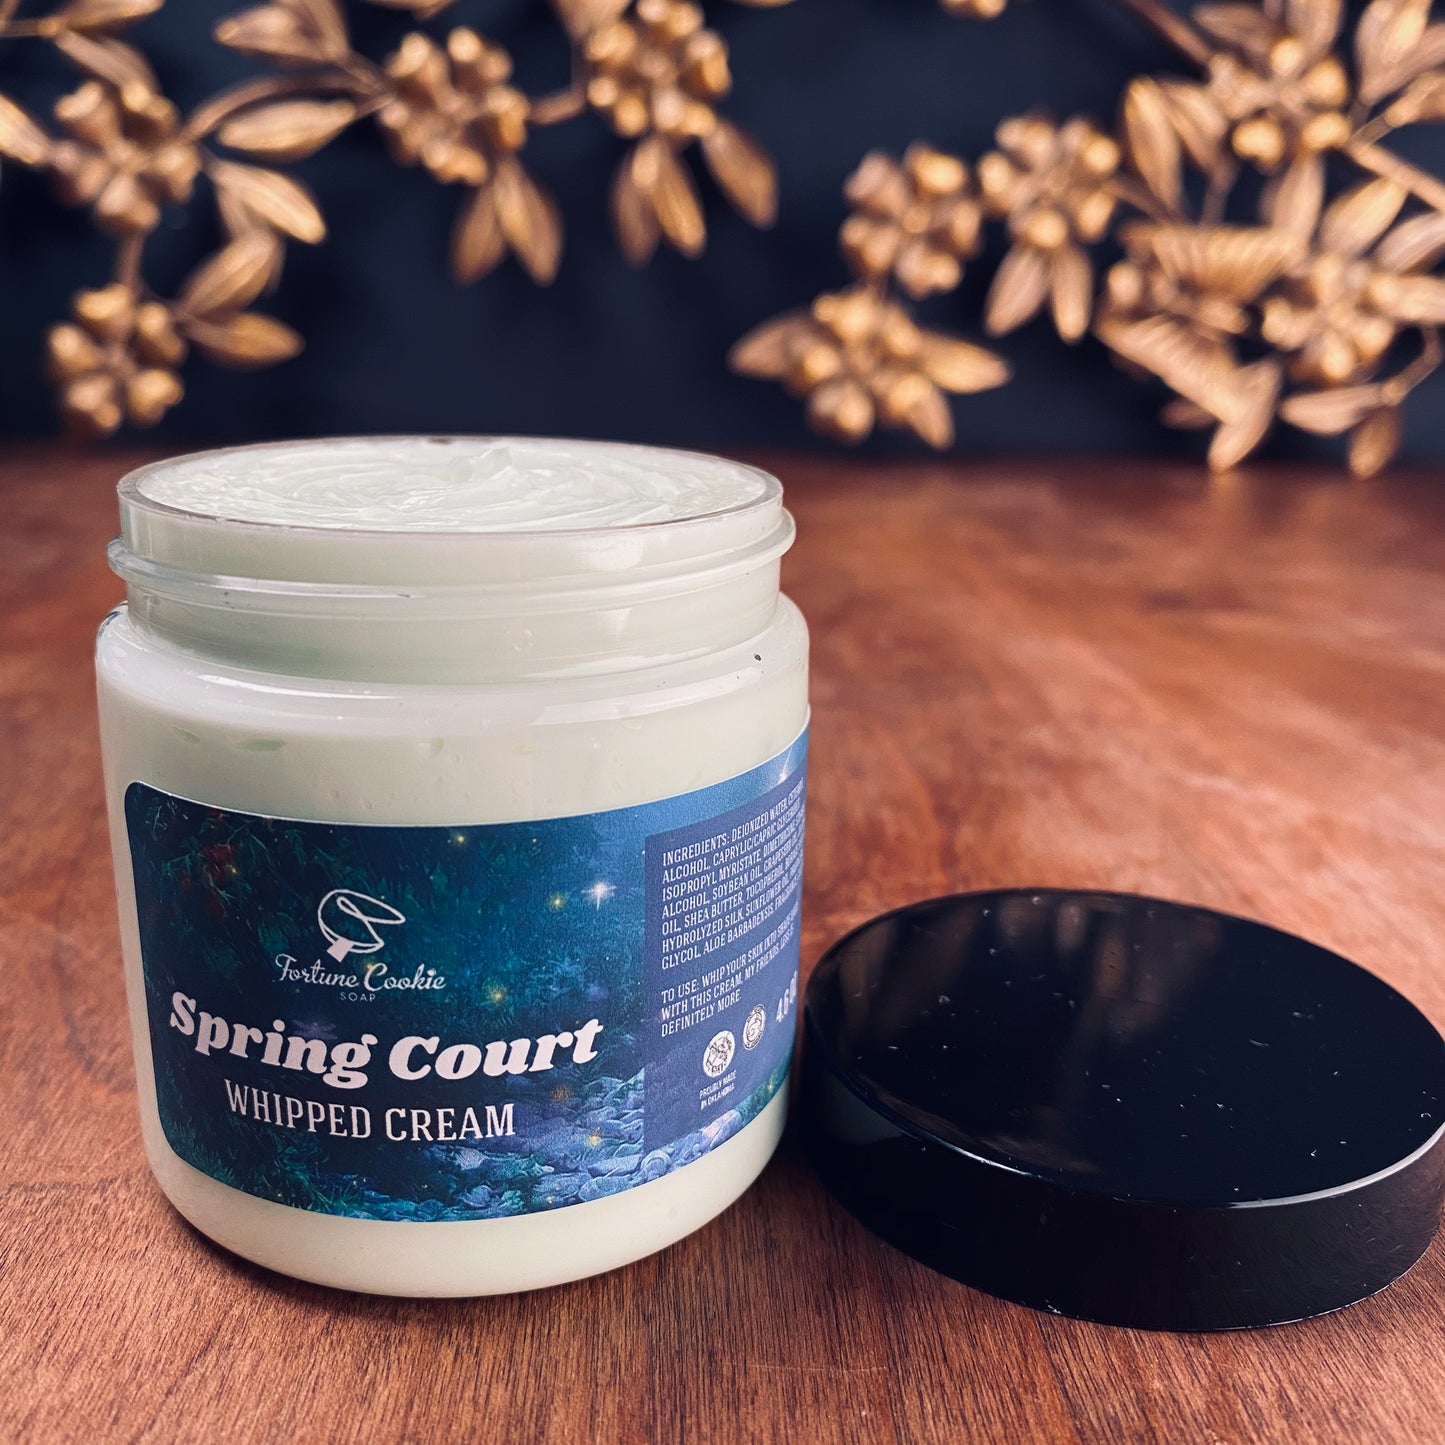 SPRING COURT Whipped Cream